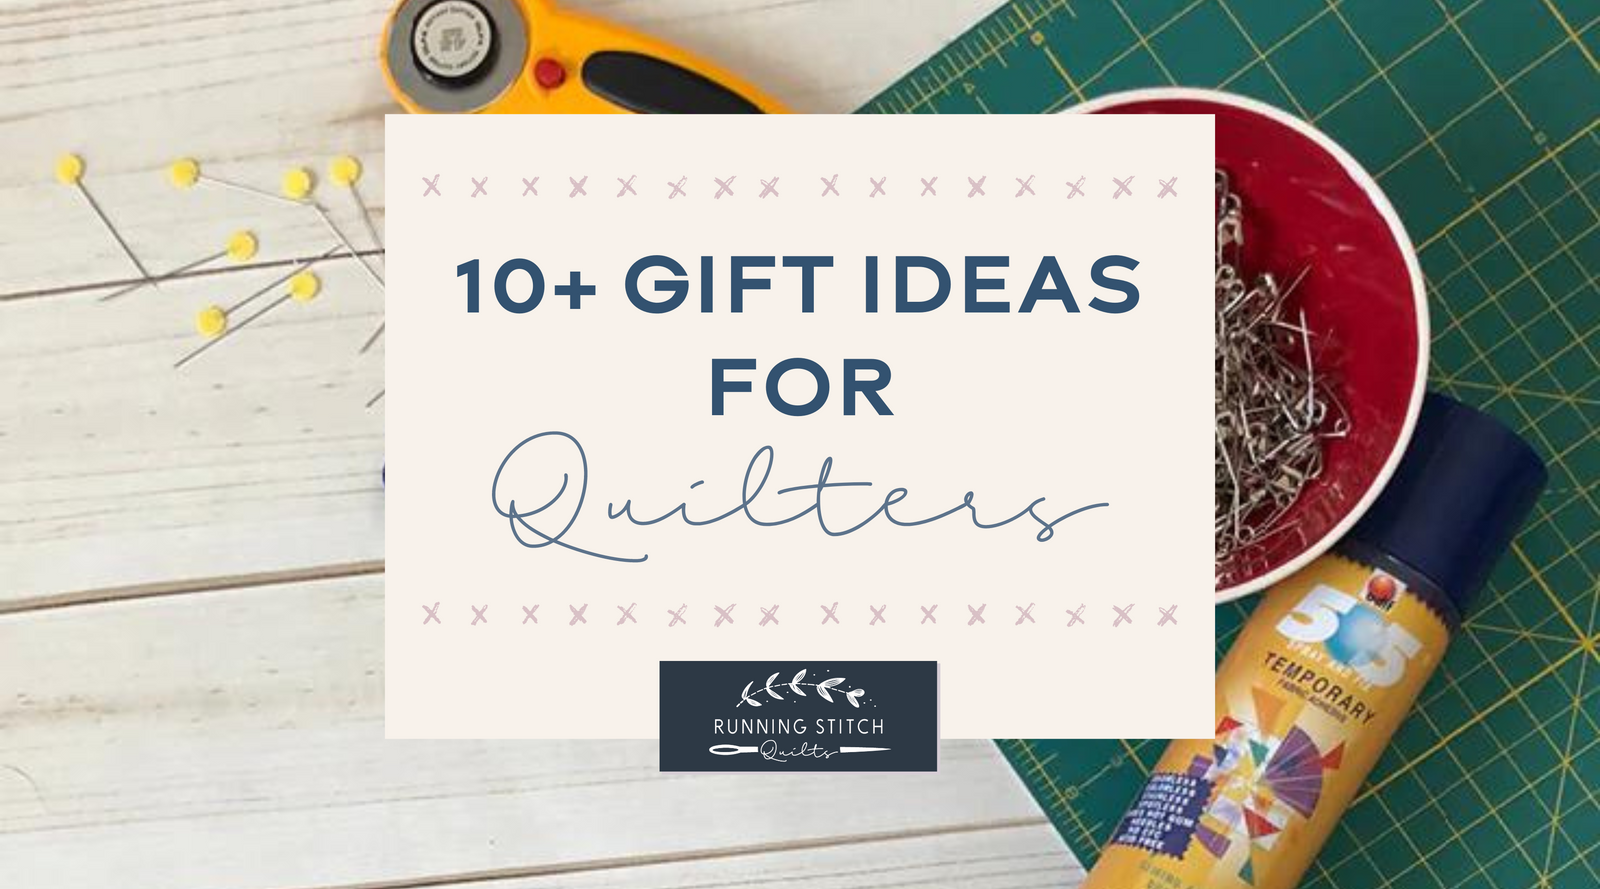 Gift Ideas for Quilters - Running Stitch Quilts